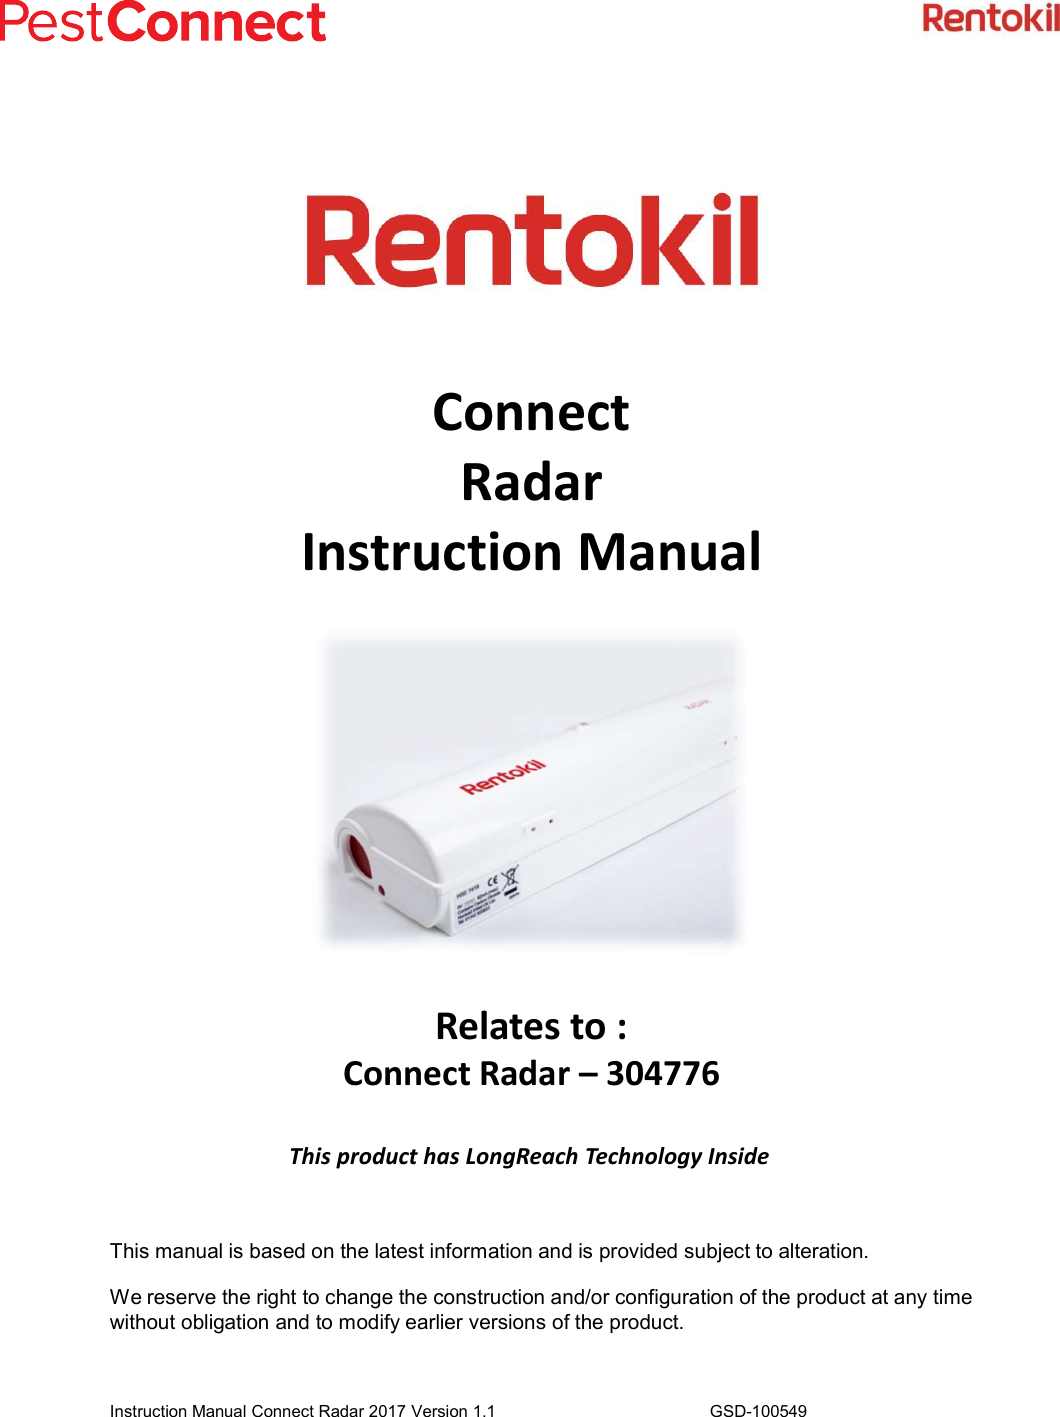 ConnectRadarInstruction ManualThis manual is based on the latest information and is provided subject to alteration.We reserve the right to change the construction and/or configuration of the product at any time without obligation and to modify earlier versions of the product.Instruction Manual Connect Radar 2017 Version 1.1 GSD-100549Relates to :Connect Radar – 304776This product has LongReach Technology Inside